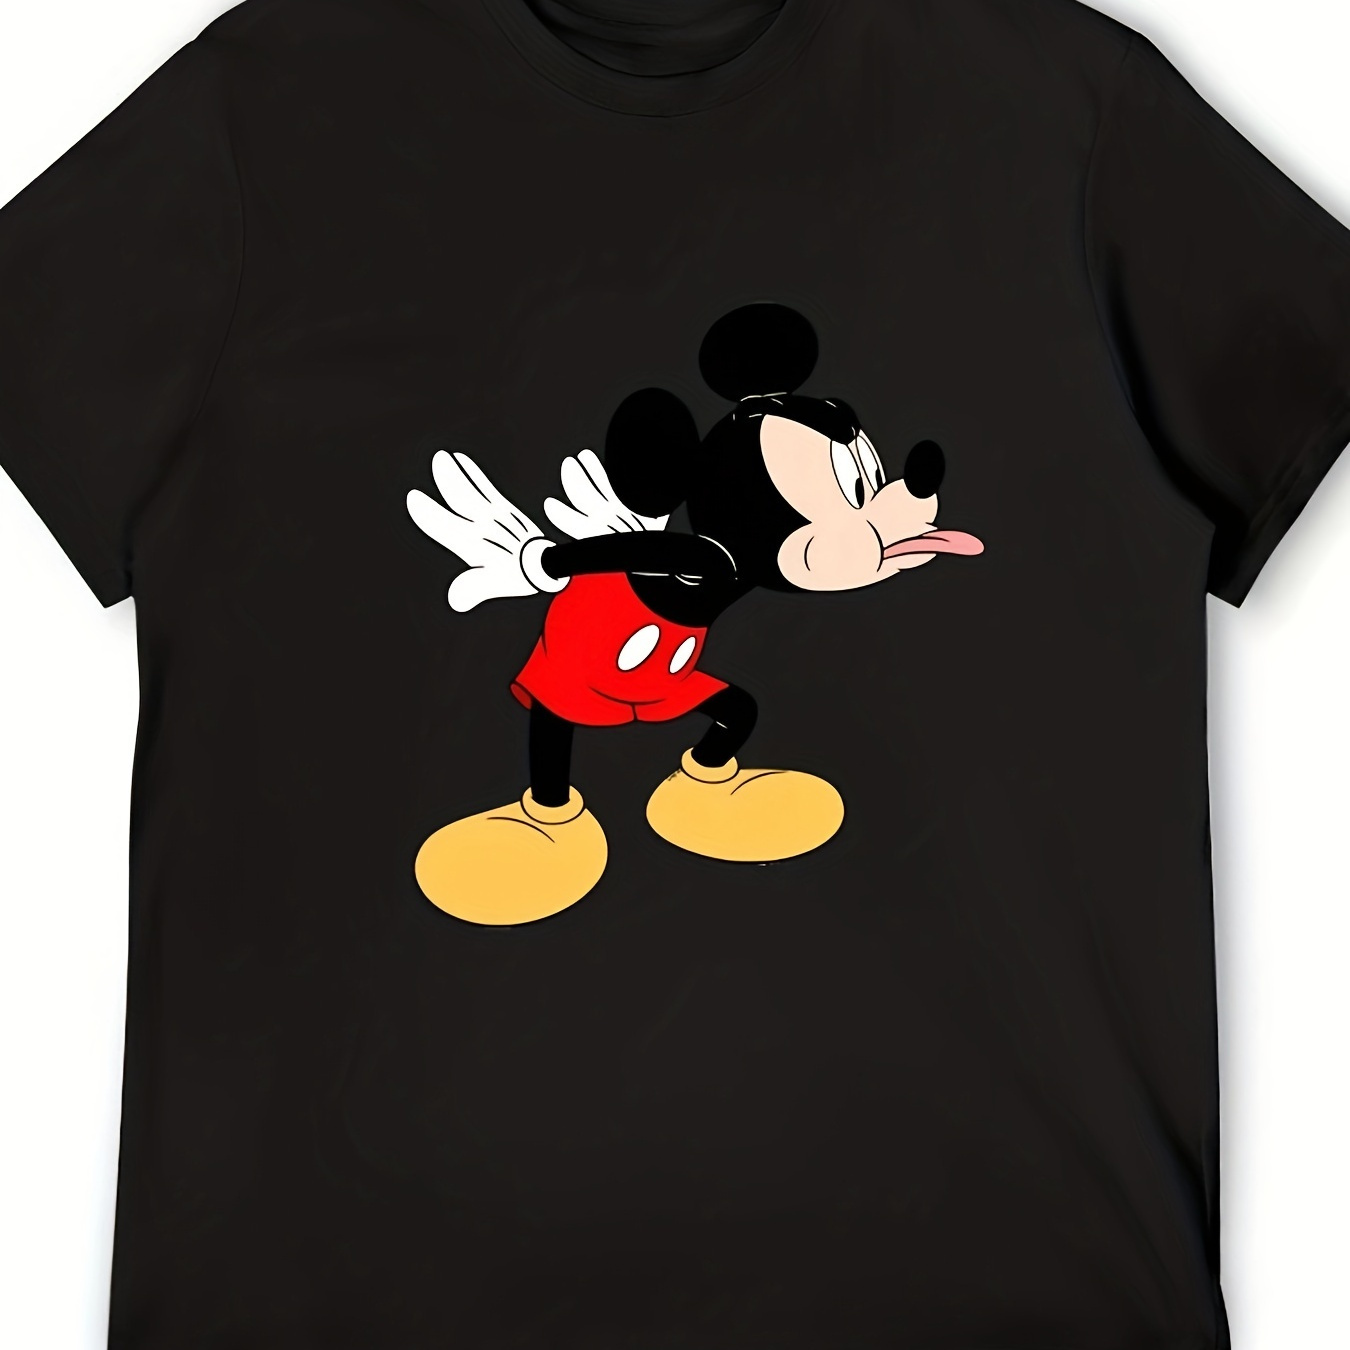 

Men's Summer Disney Fashion, Mickey Mouse Making Face Illustration Pattern Crew Neck And Short Sleeve T-shirt, Chic And Trendy Pure Cotton Tops For Daily Outerwear